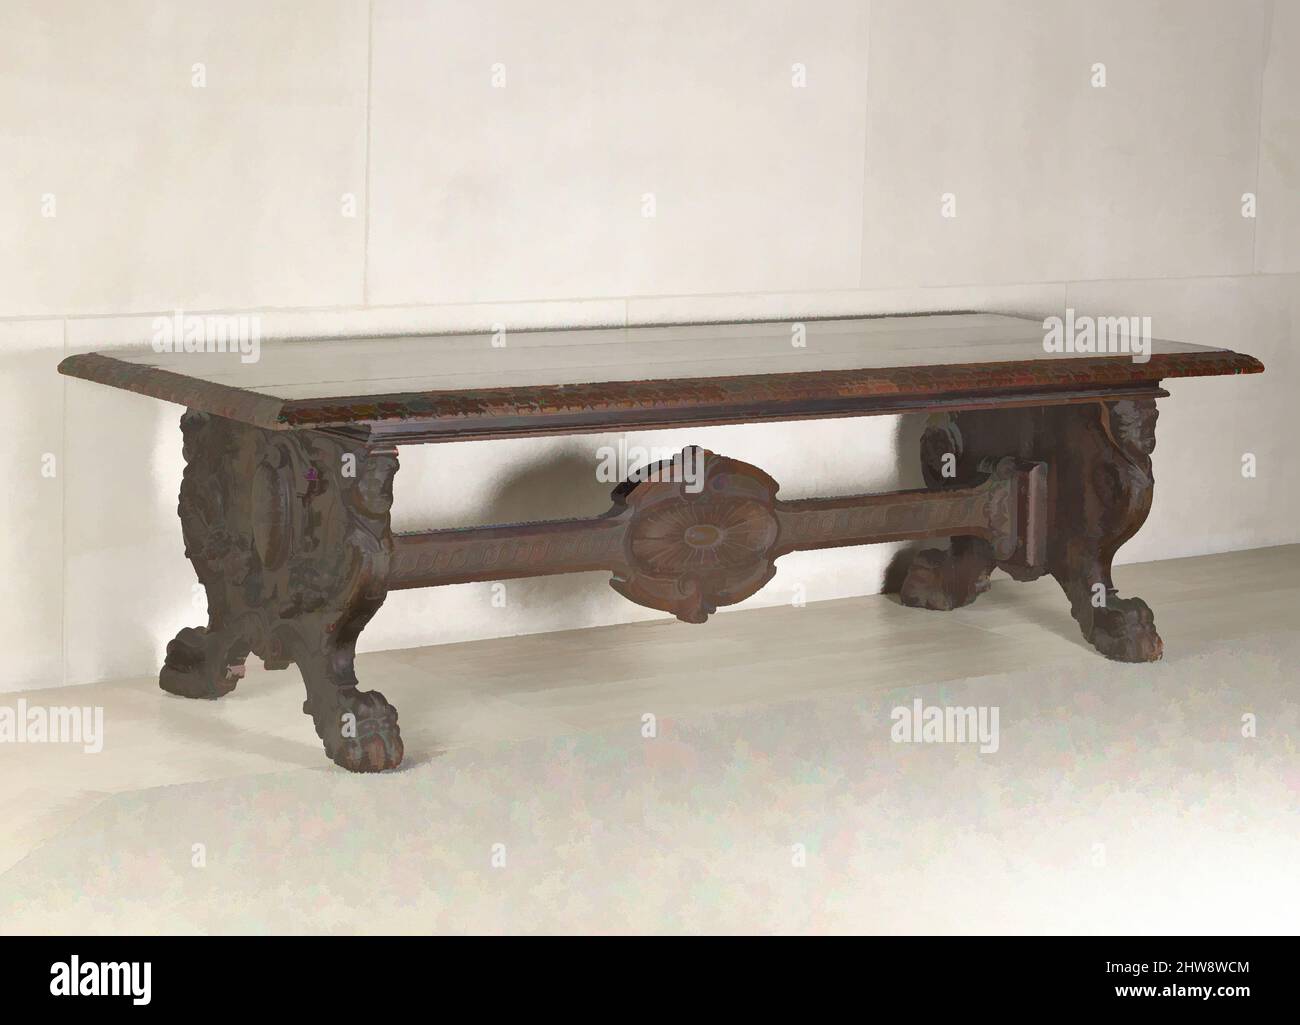 Art inspired by Center table, 19th century, second half or early 20th century, Italian, Walnut, carved., H. 76.2 cm, W. 279.6 cm, D. 101.6 cm, Woodwork-Furniture, Classic works modernized by Artotop with a splash of modernity. Shapes, color and value, eye-catching visual impact on art. Emotions through freedom of artworks in a contemporary way. A timeless message pursuing a wildly creative new direction. Artists turning to the digital medium and creating the Artotop NFT Stock Photo